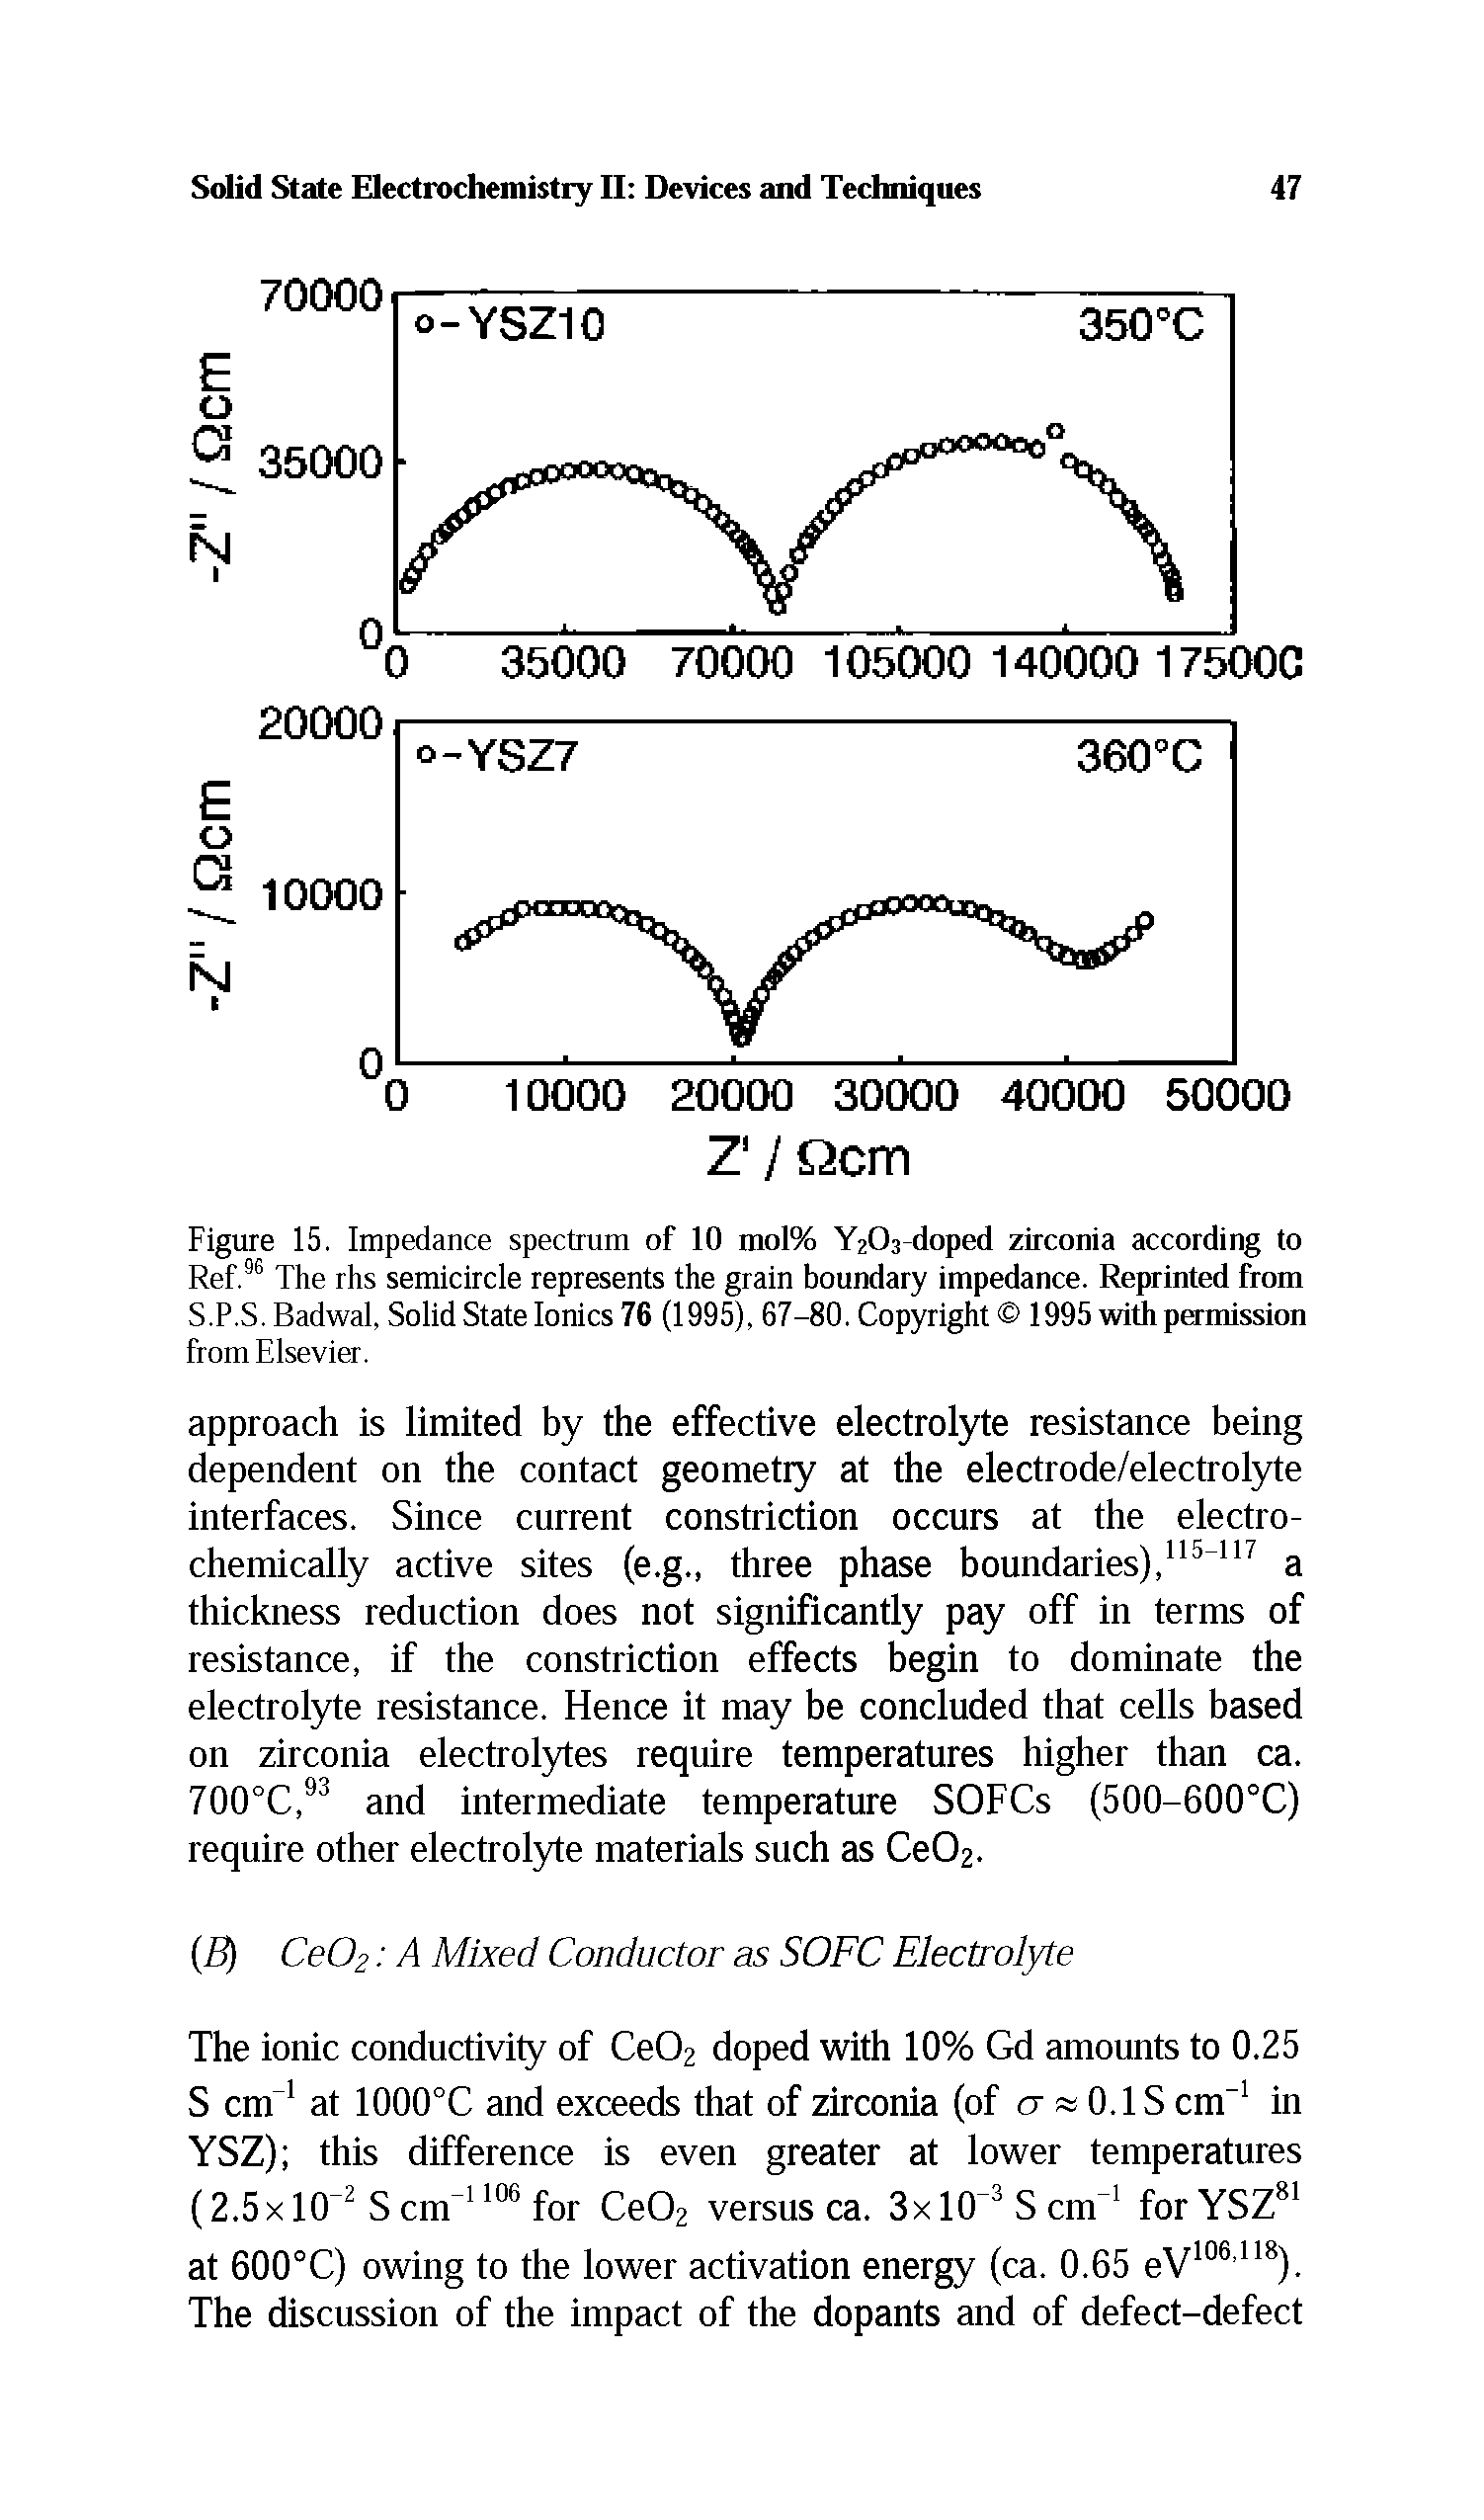 Figure 15. Impedance spectrum of 10 mol% Y2C>3-doped zirconia according to Ref.96 The rhs semicircle represents the grain boundary impedance. Reprinted from S.P.S. Badwal, Solid State Ionics 76 (1995), 67-80. Copyright 1995 with permission from Elsevier.